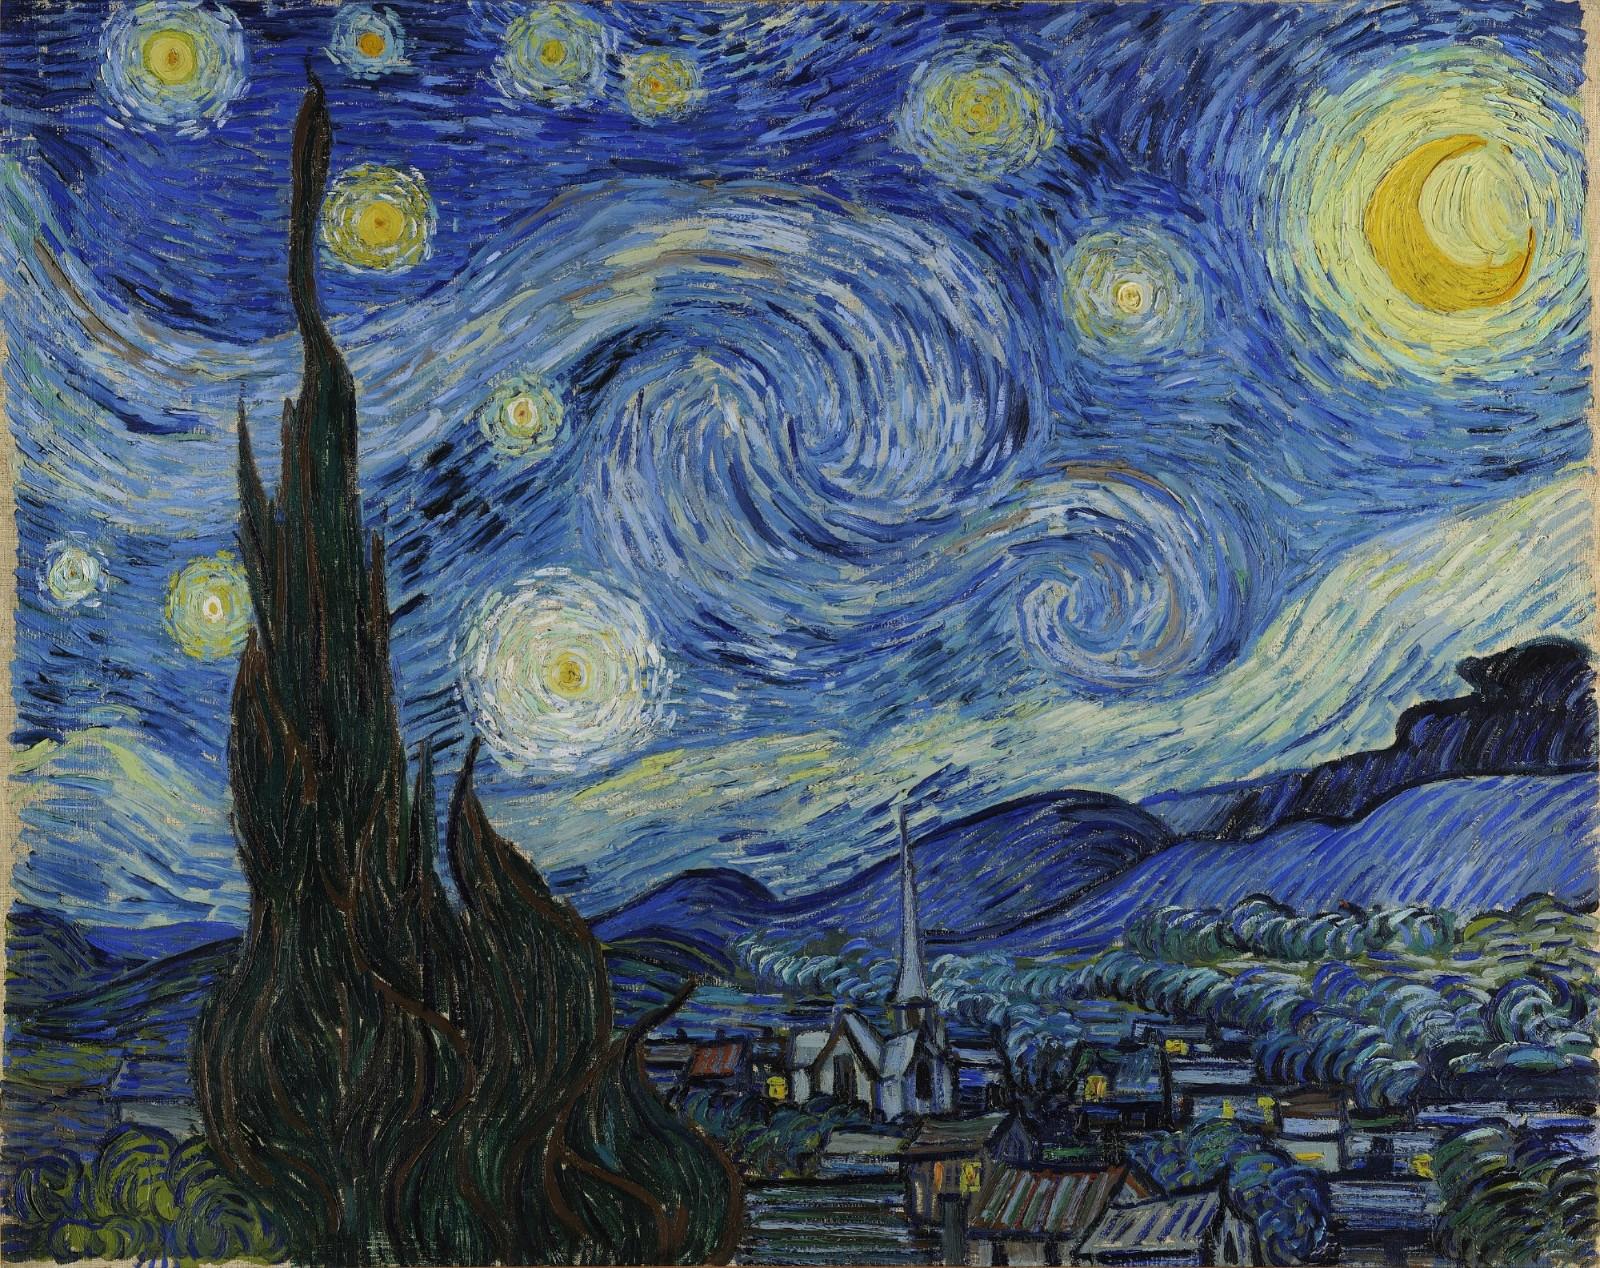 A Brief History of Van Gogh's “Starry Night”